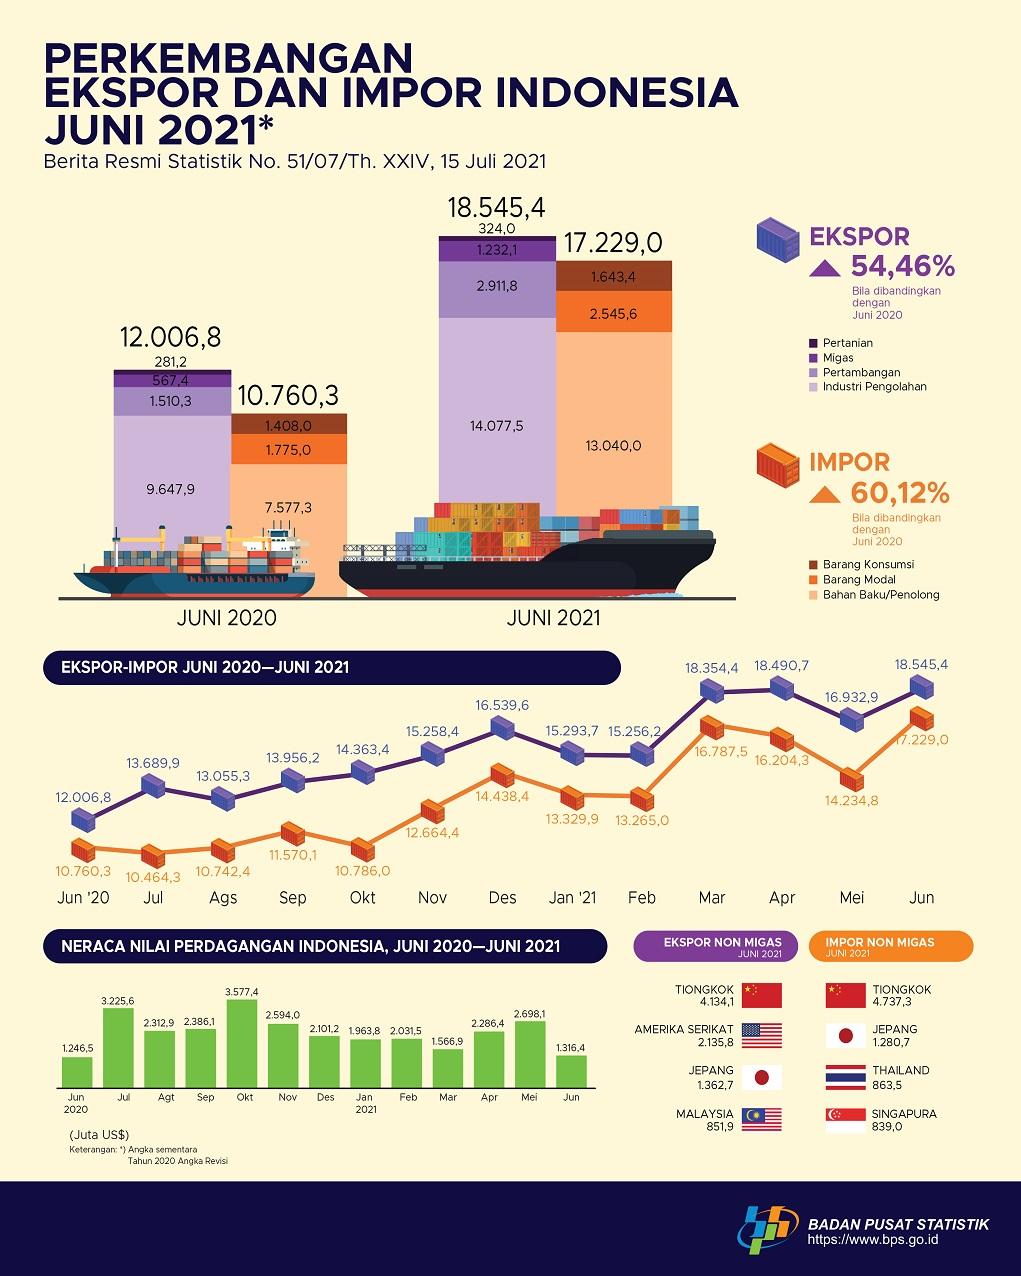 June 2021 exports reached US$18.55 billion, imports reached to US$17.23 billion